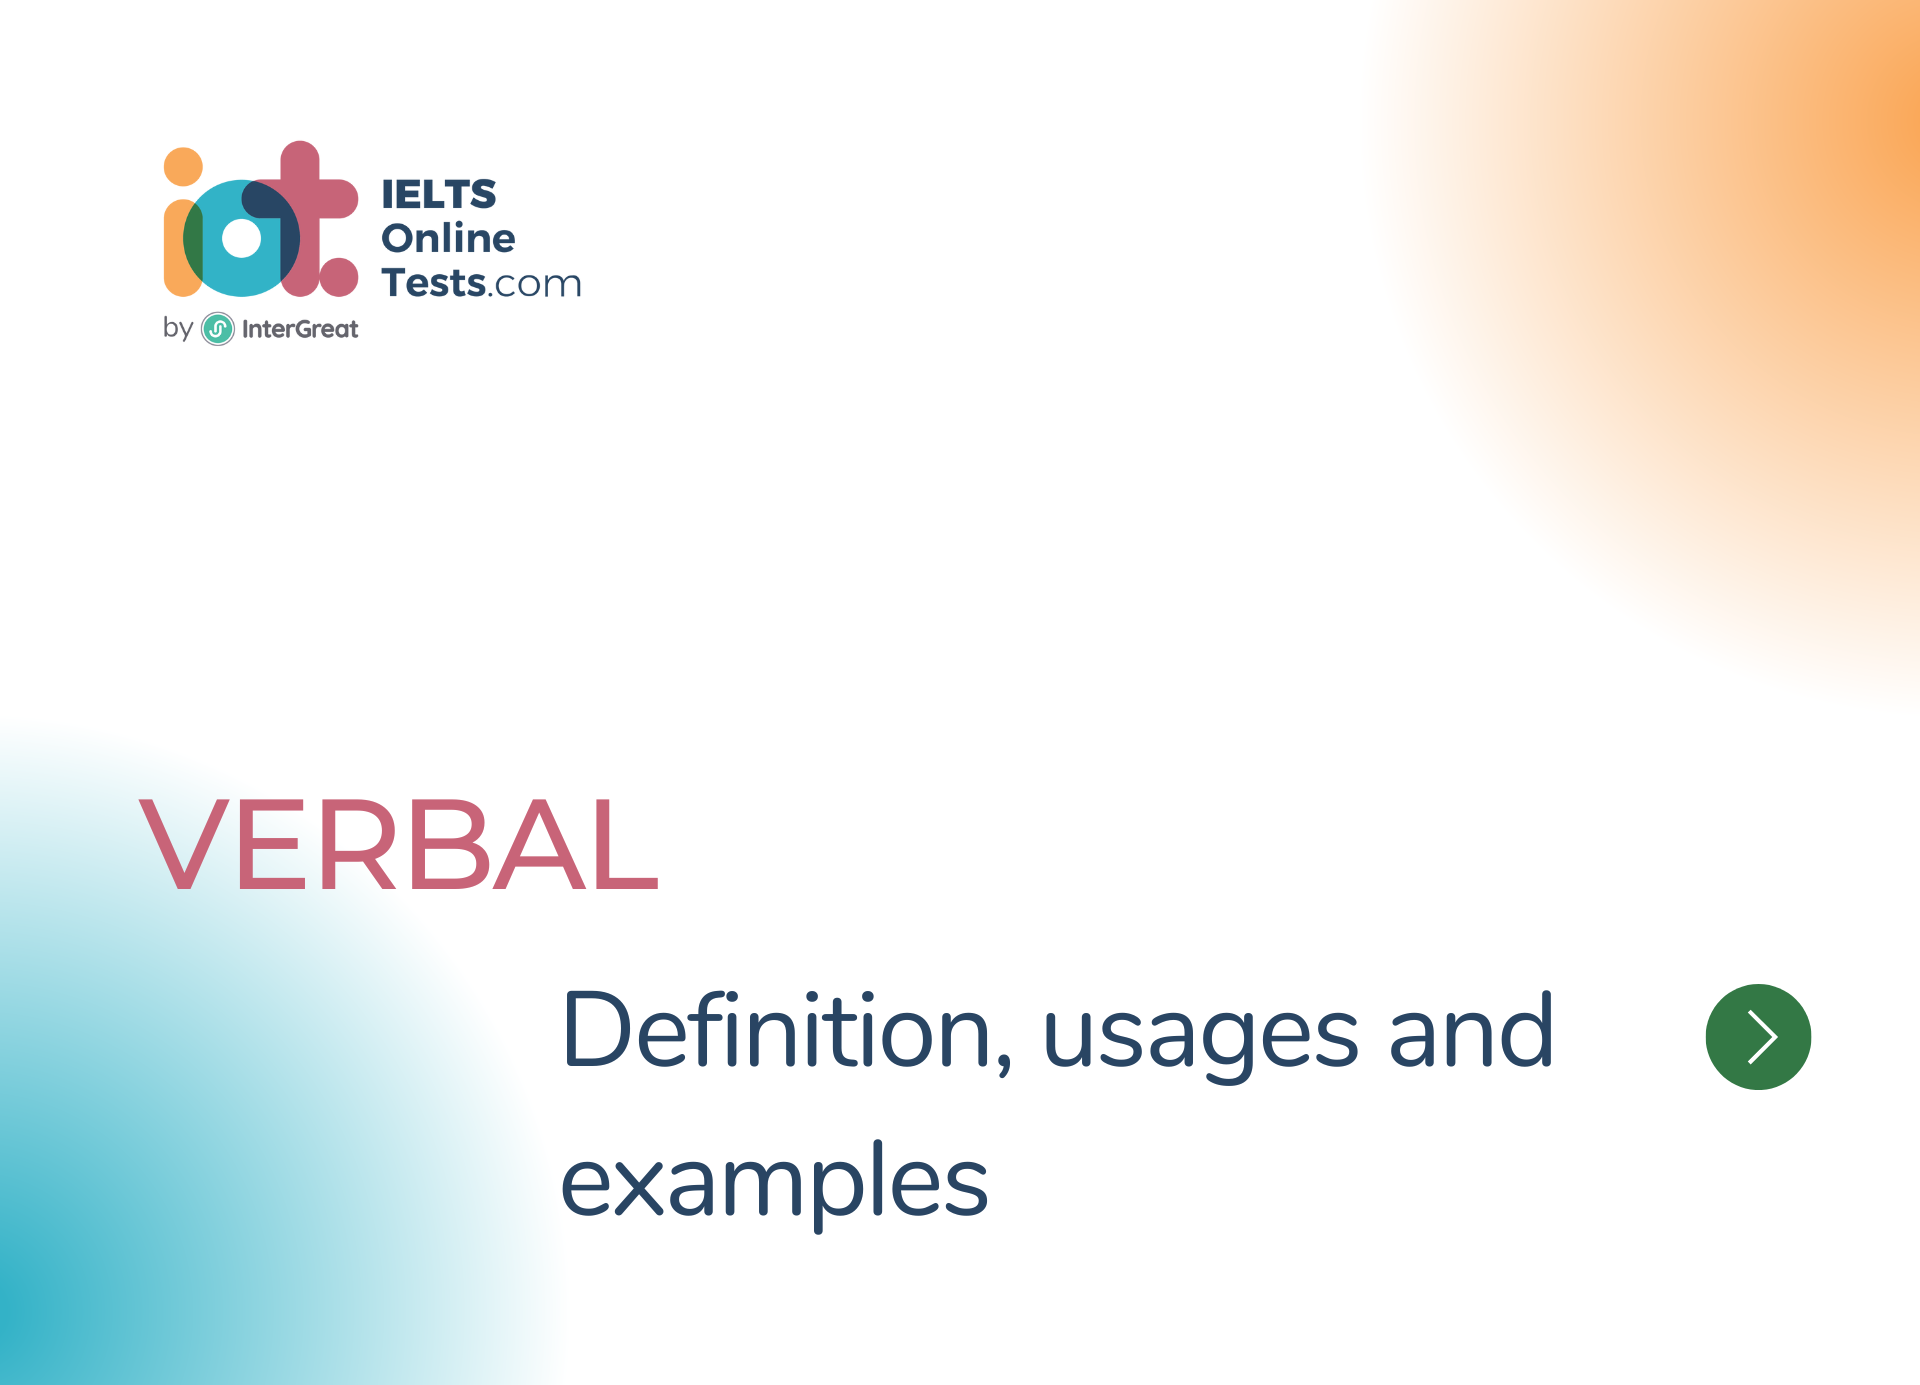 Verbal definition, usages and examples